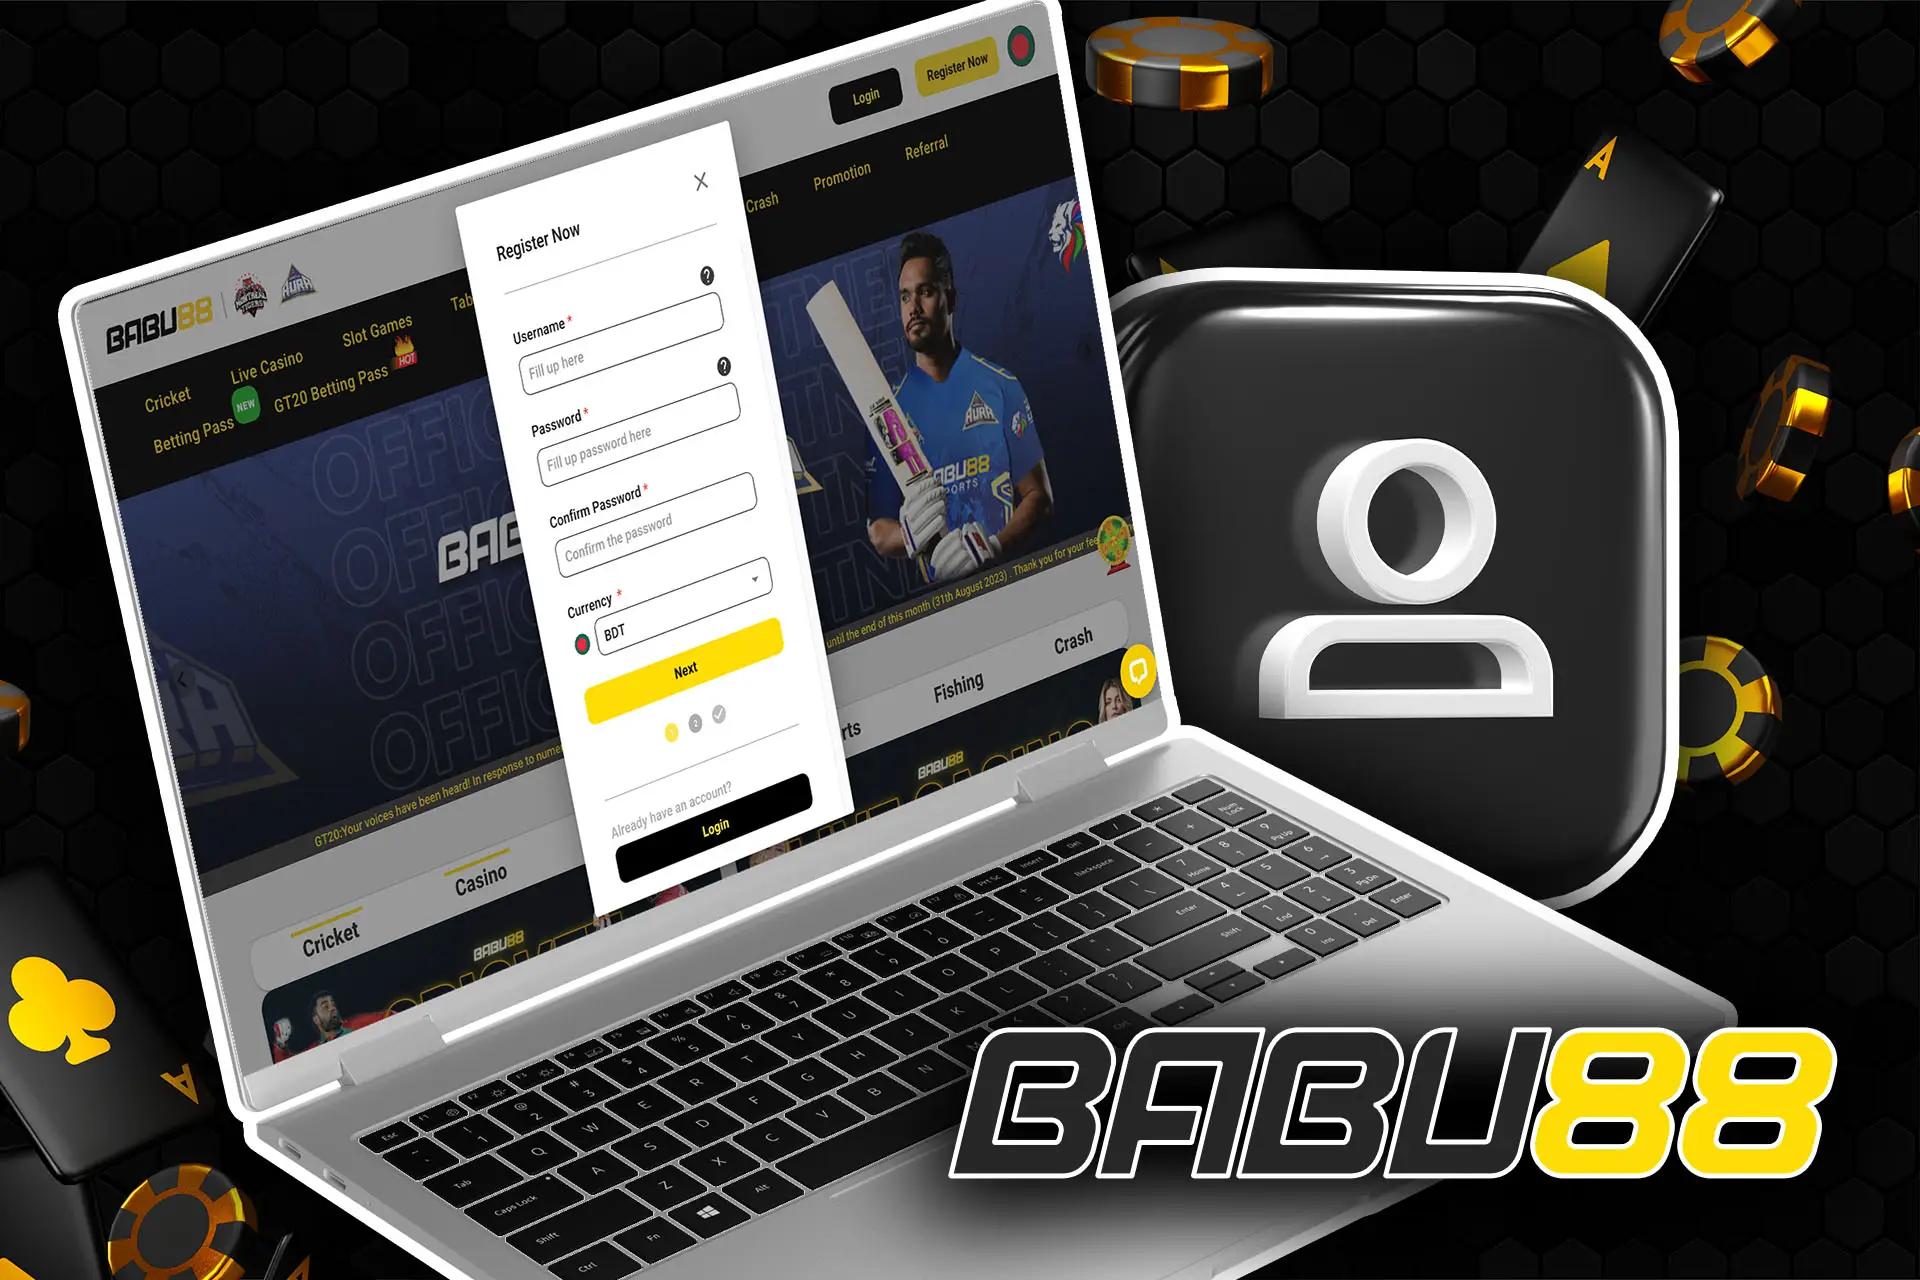 Open the Babu88 website and create your account.